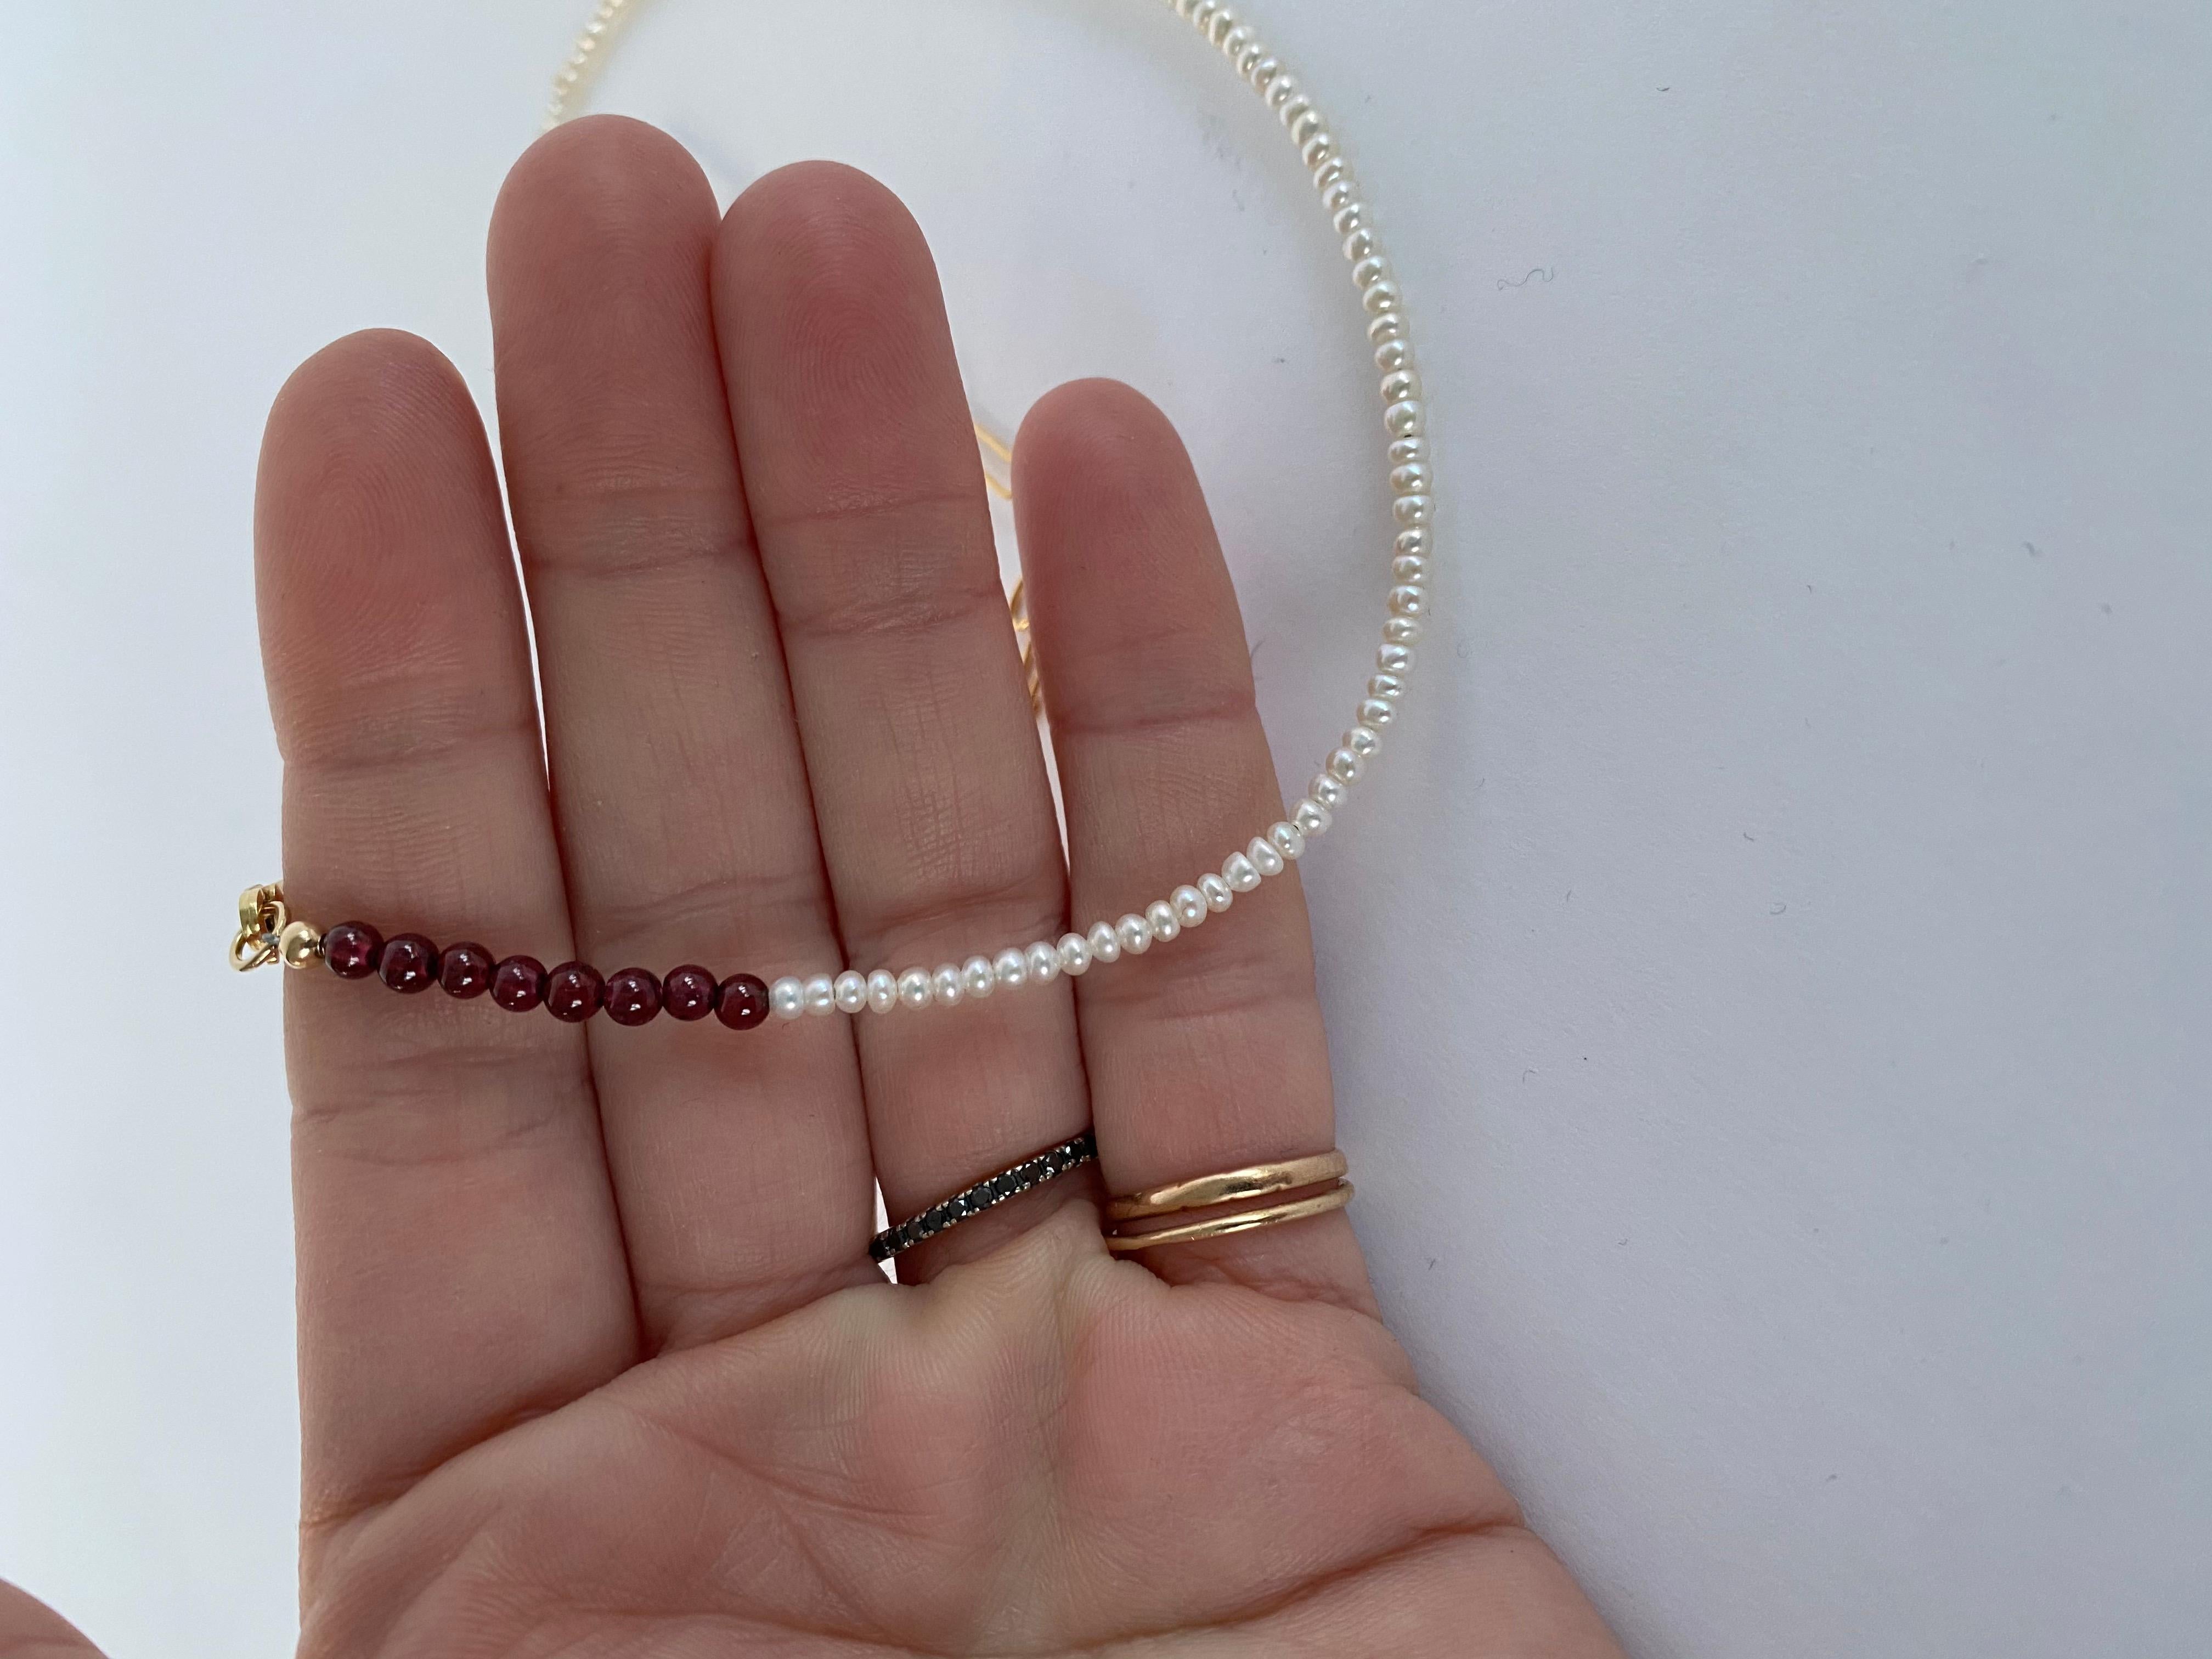 White Pearl Red Garnet Choker Bead Necklace Gold Filled Chain 20